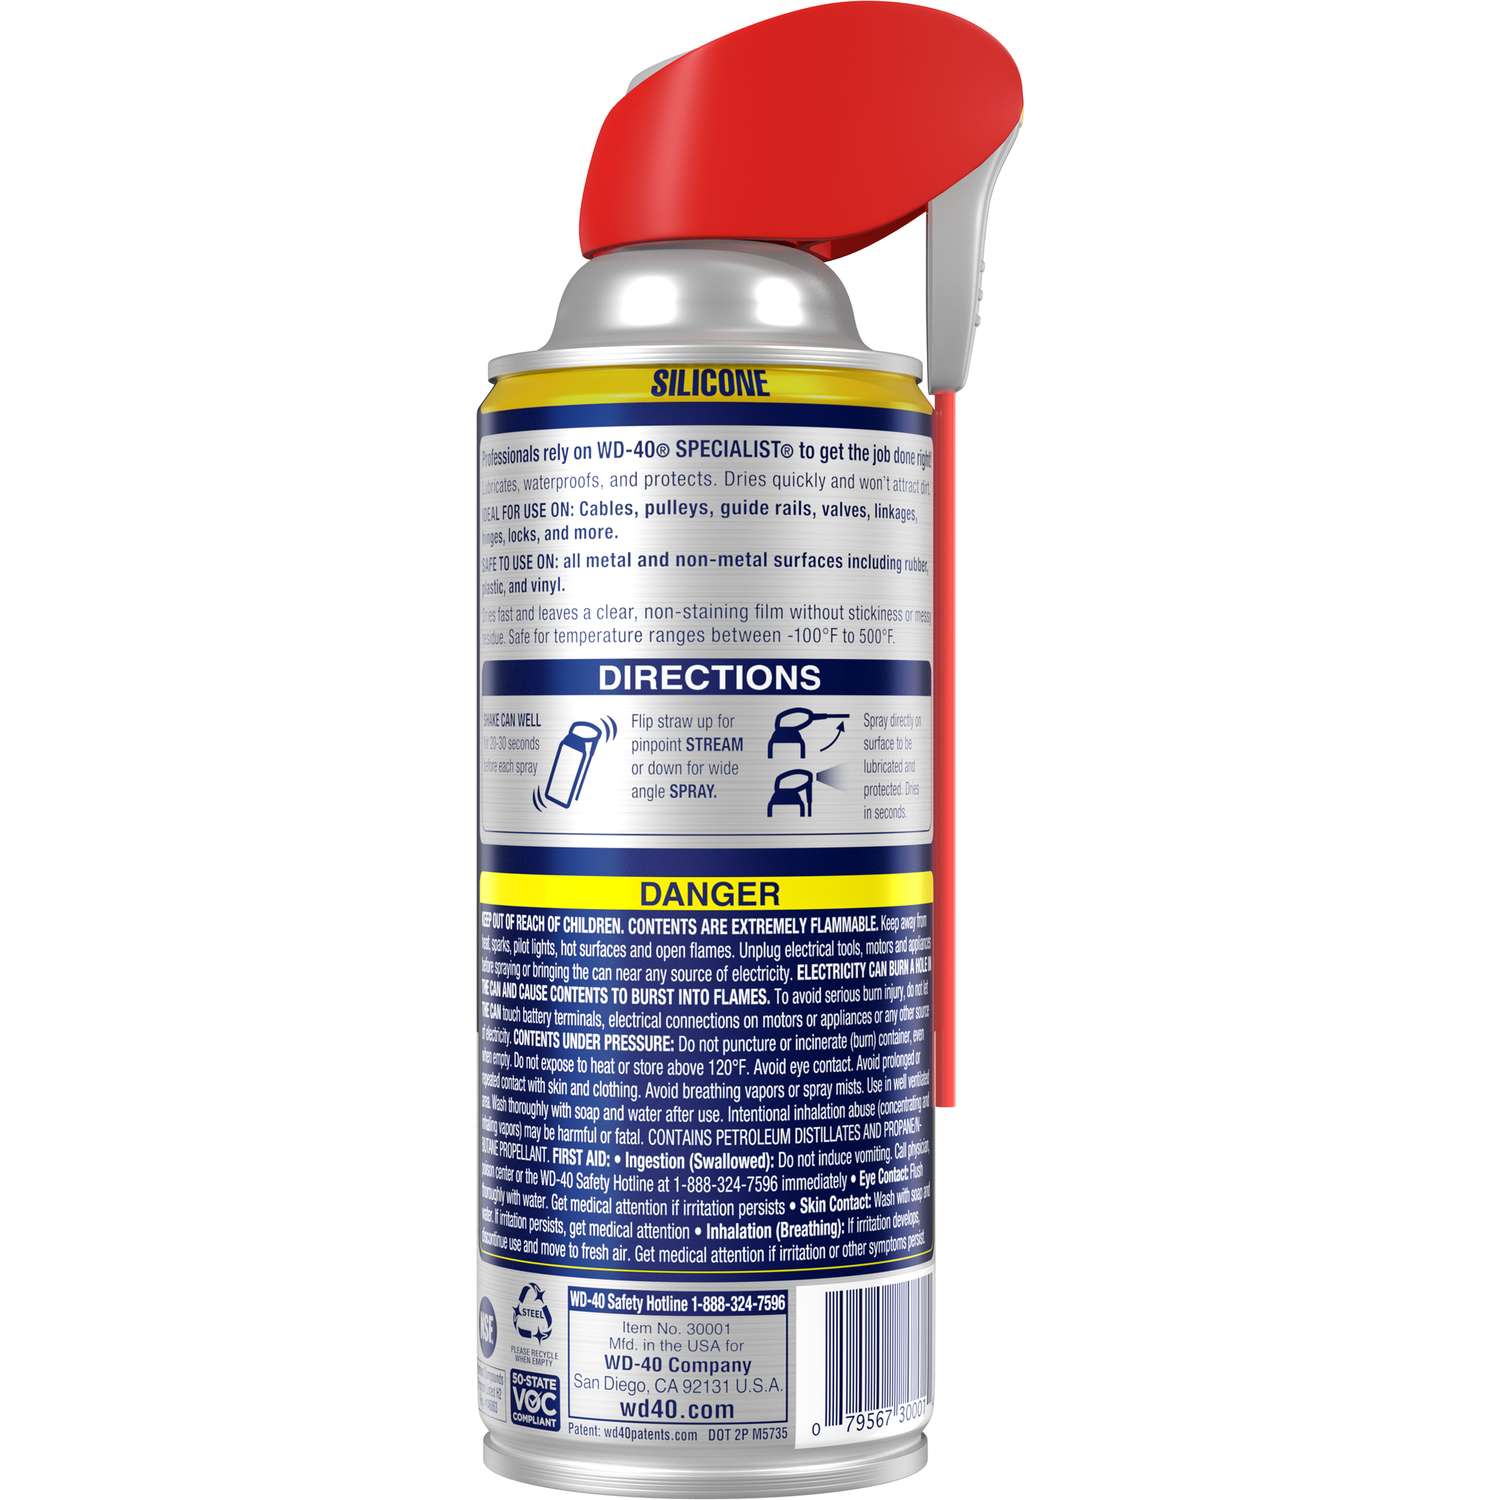 Silicone Spray for sale online